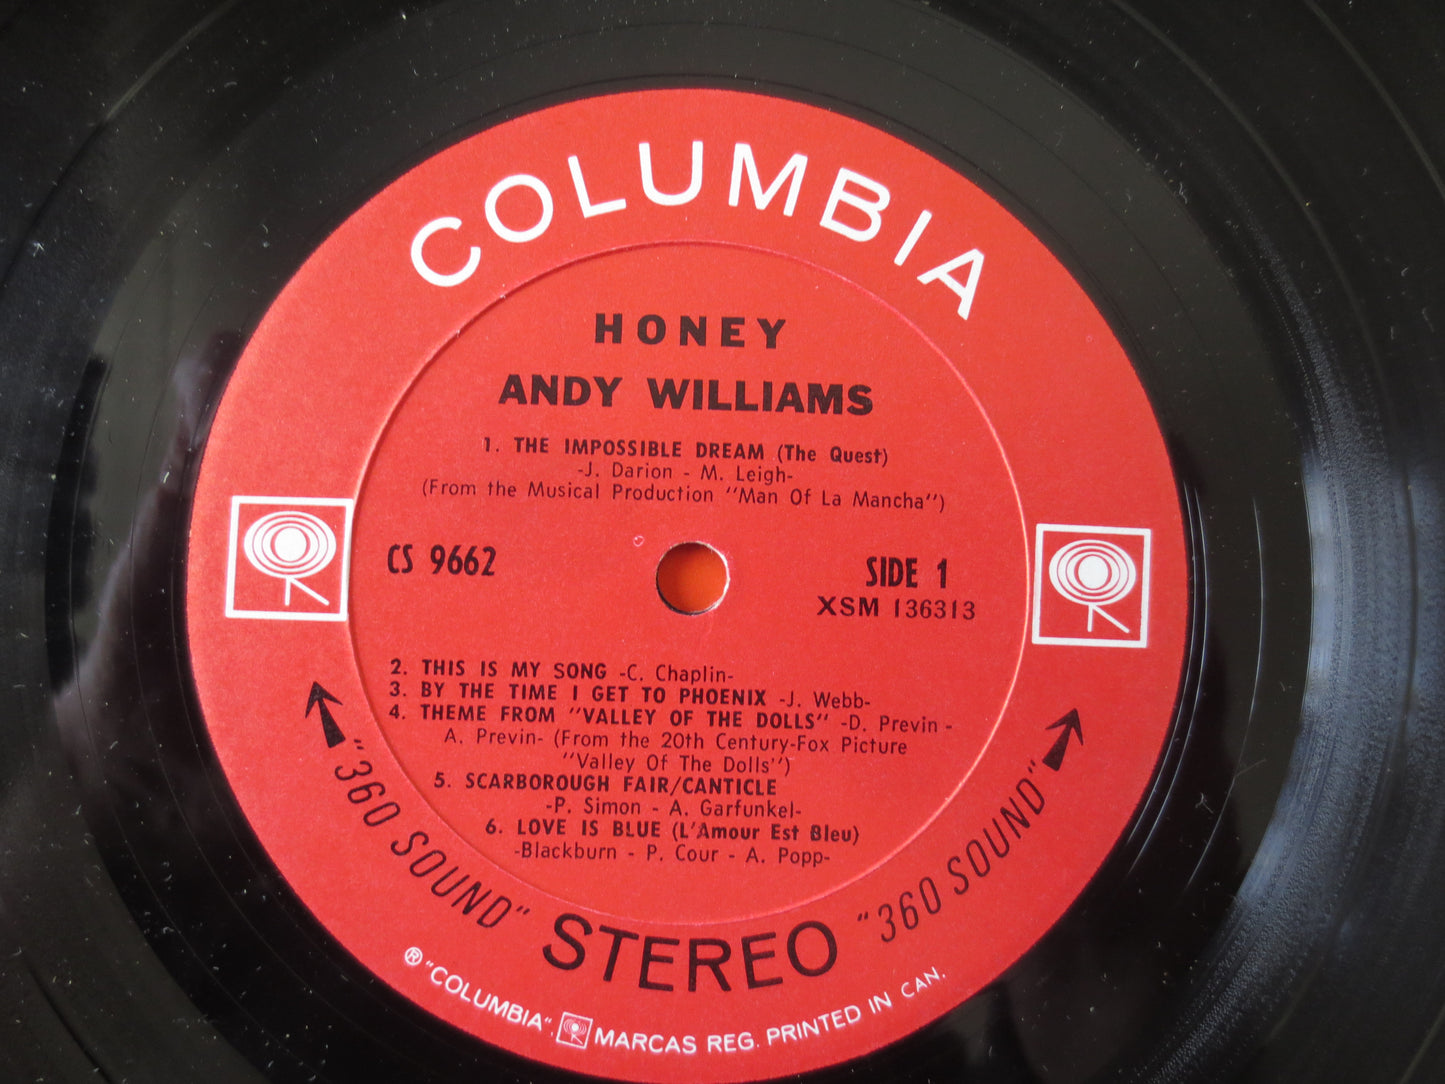 ANDY WILLIAMS, HONEY, Andy Williams Albums, Andy Williams Vinyl, Vintage Vinyl, Jazz Albums, Vinyl Lps, Lps, 1968 Records